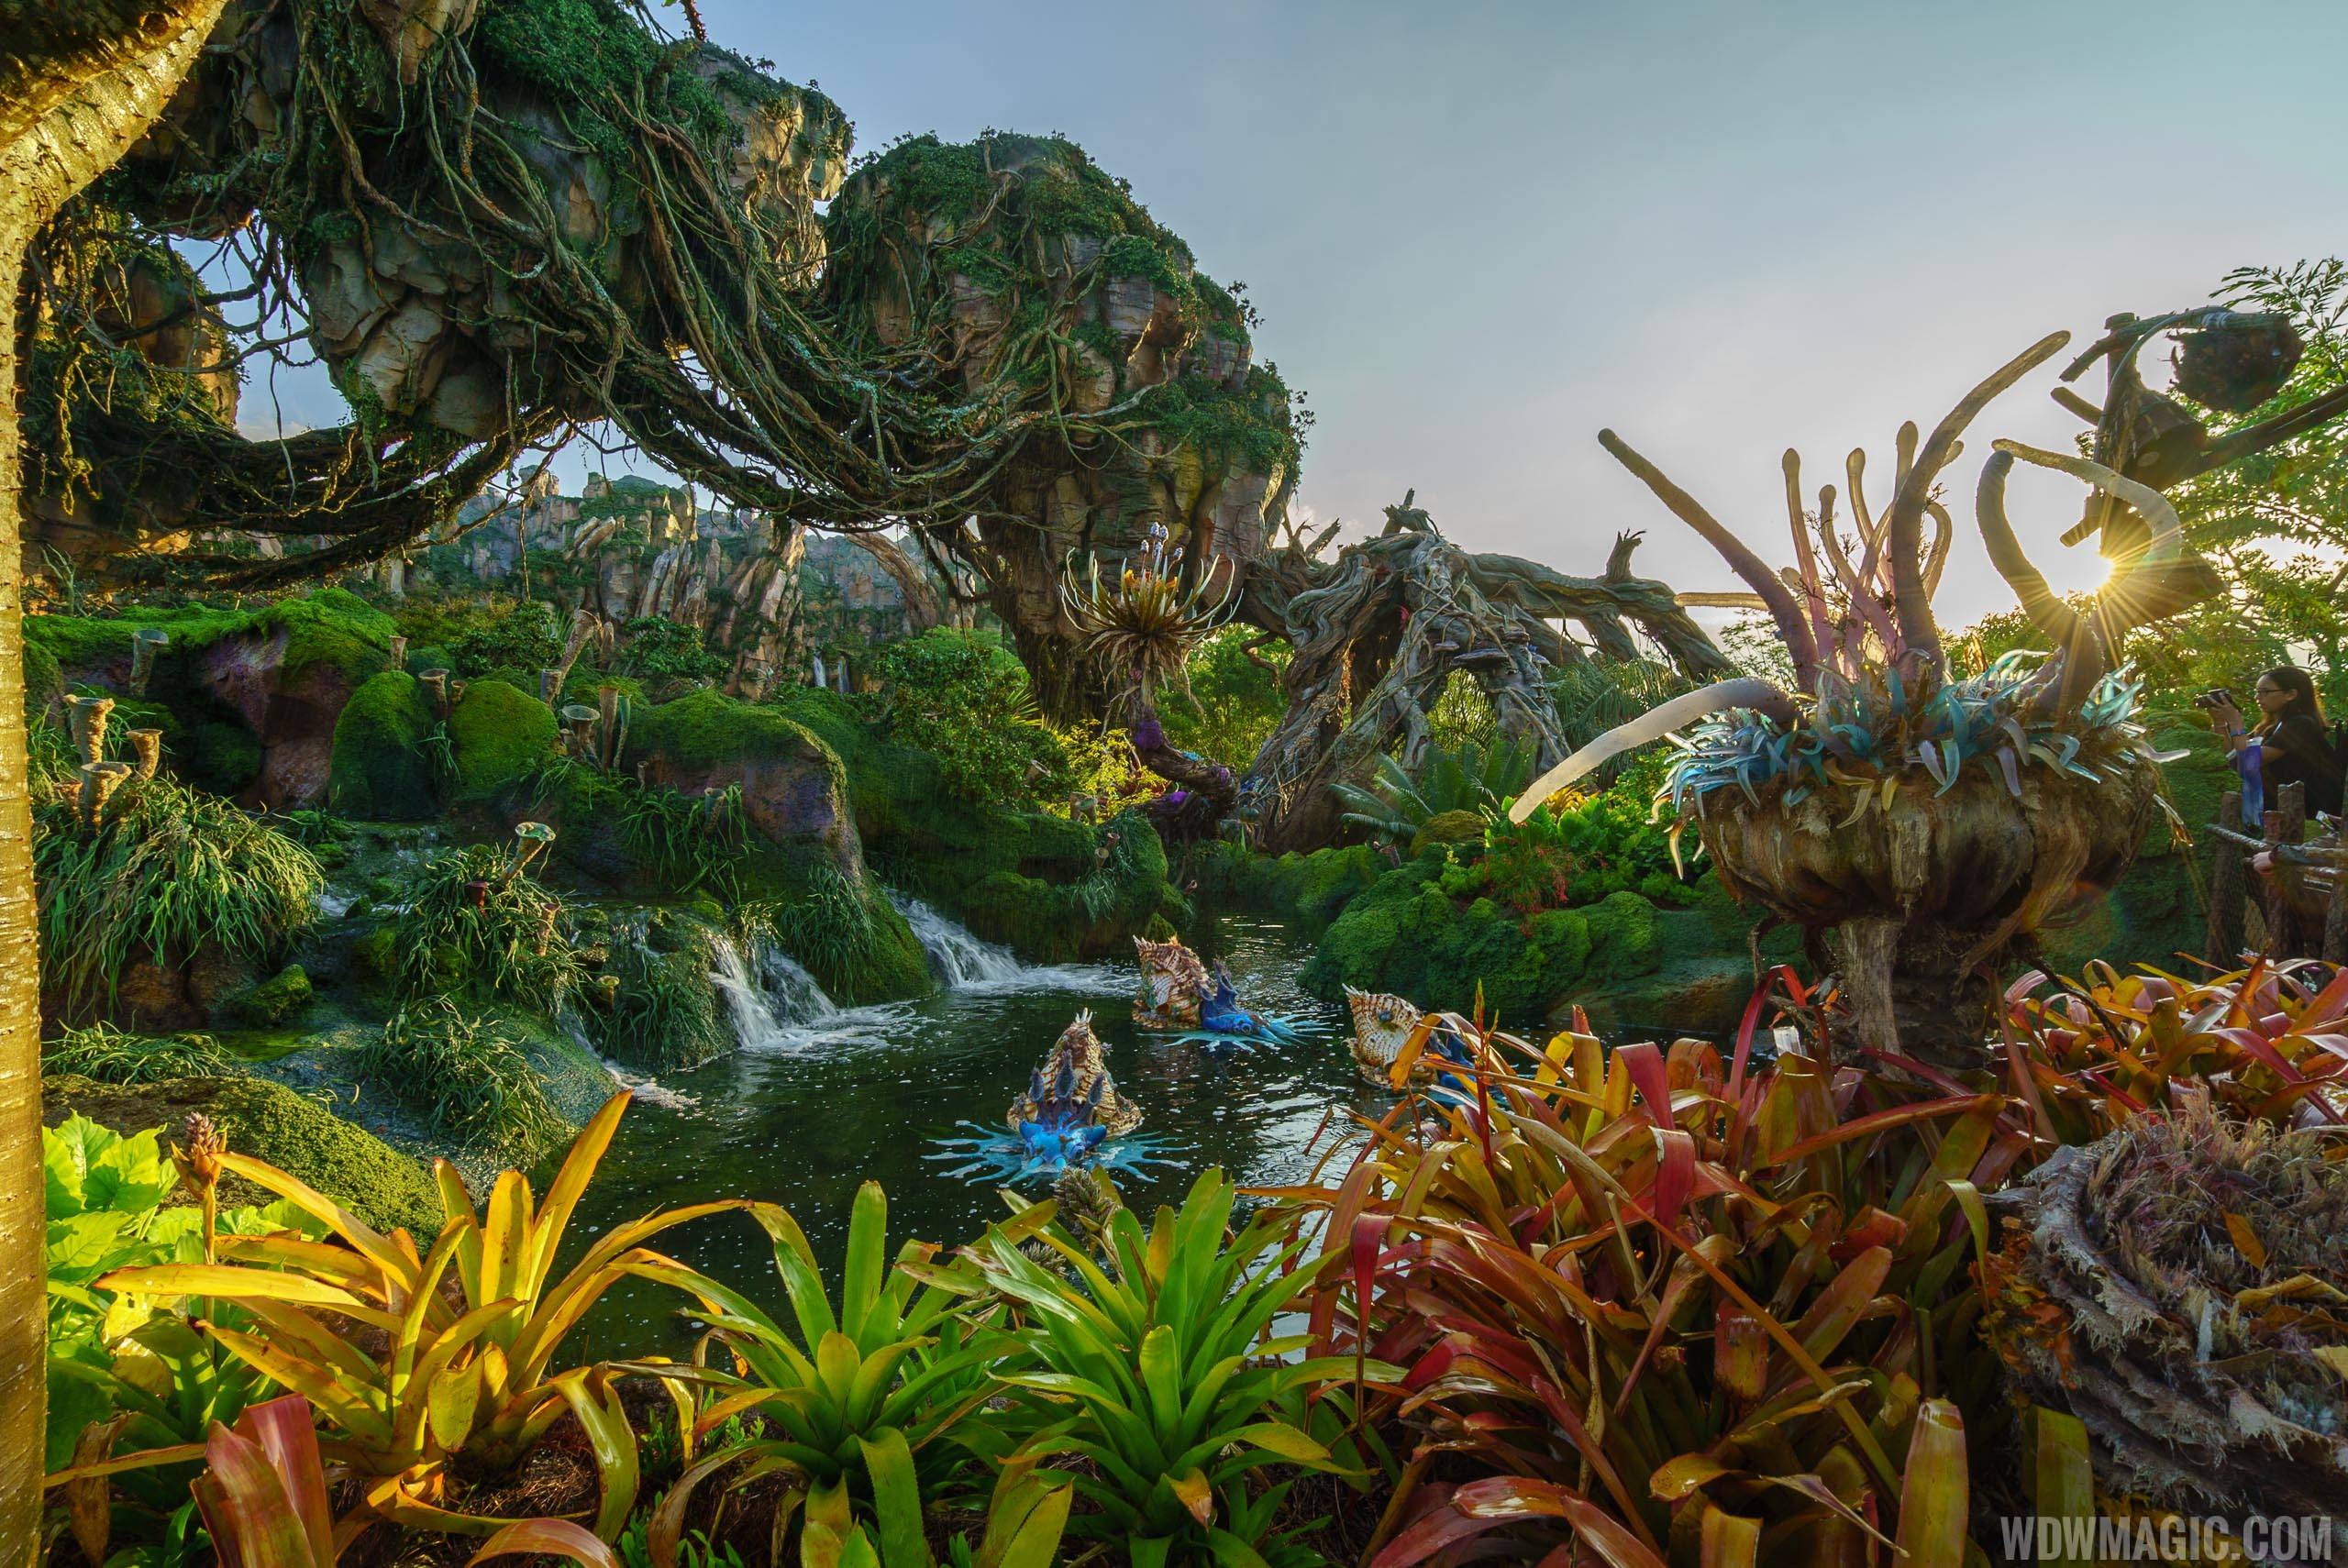 Flight of Passage at Disney's Animal Kingdom currently leads the wait times at 260 minutes